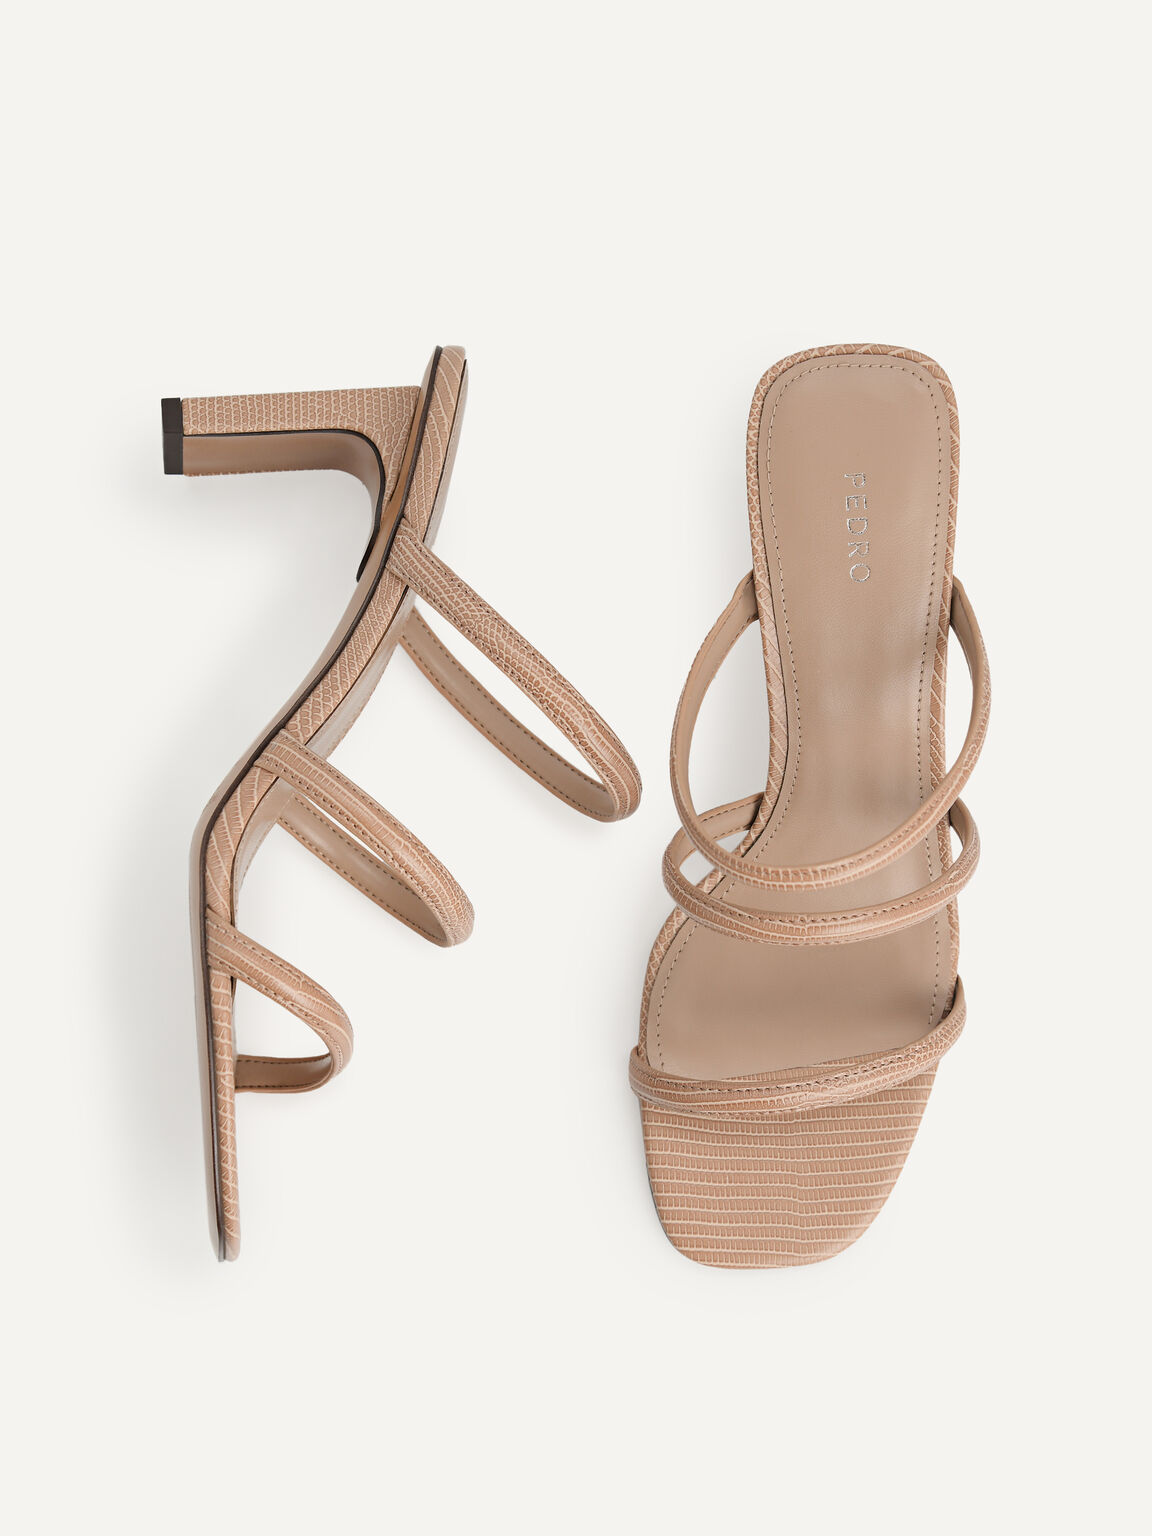 Strappy Heeled Lizard-Effect Sandals, Taupe